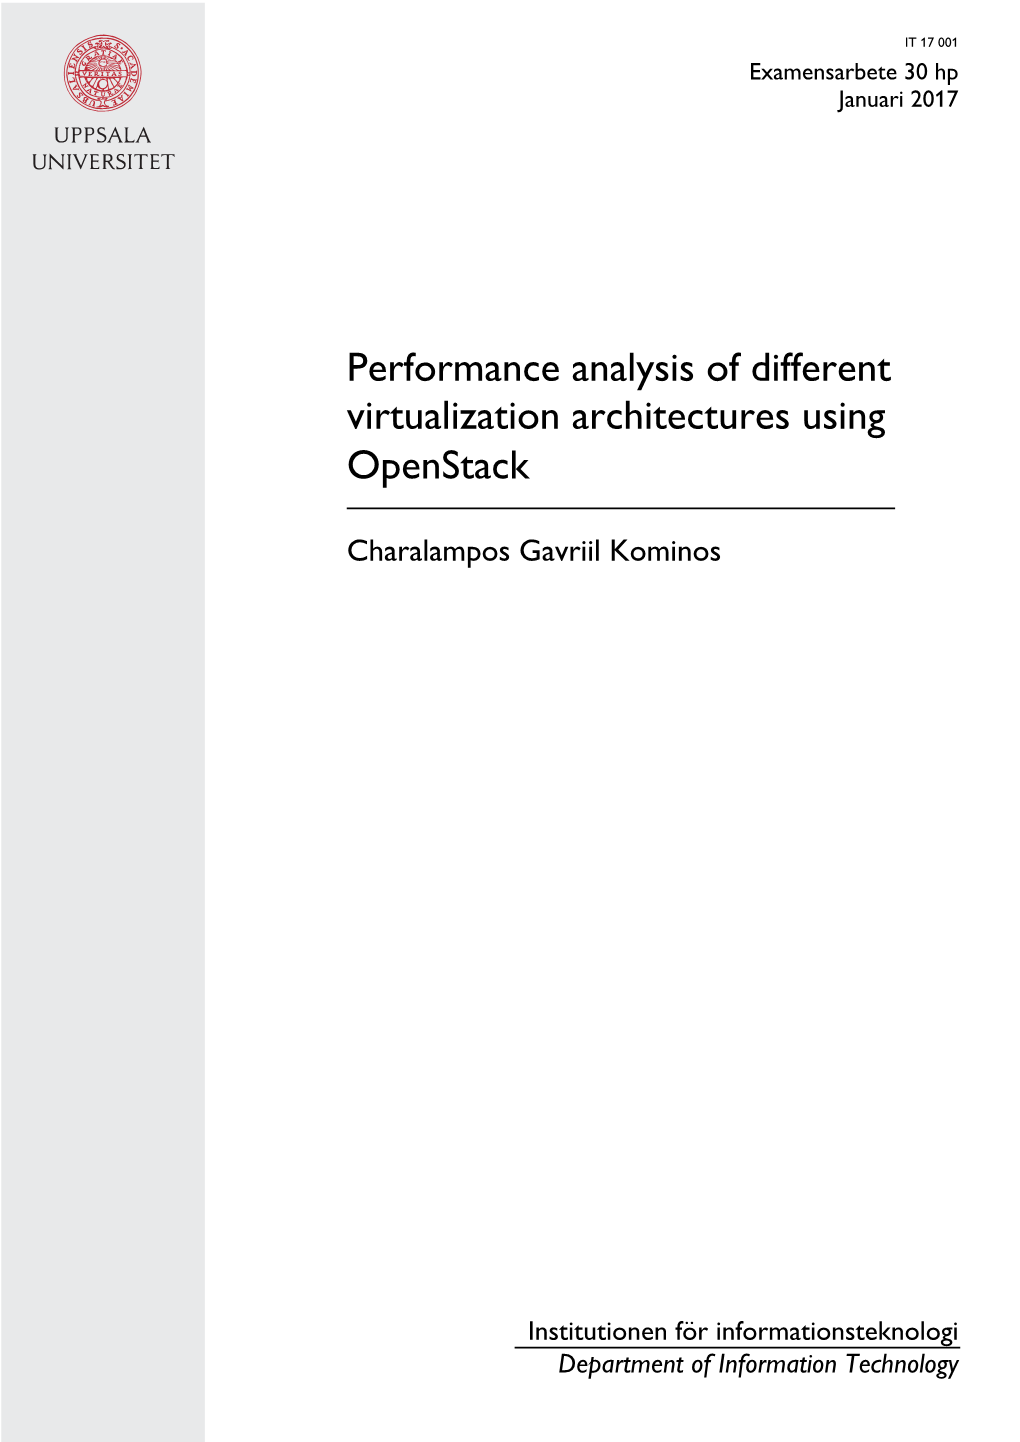 Performance Analysis of Different Virtualization Architectures Using Openstack